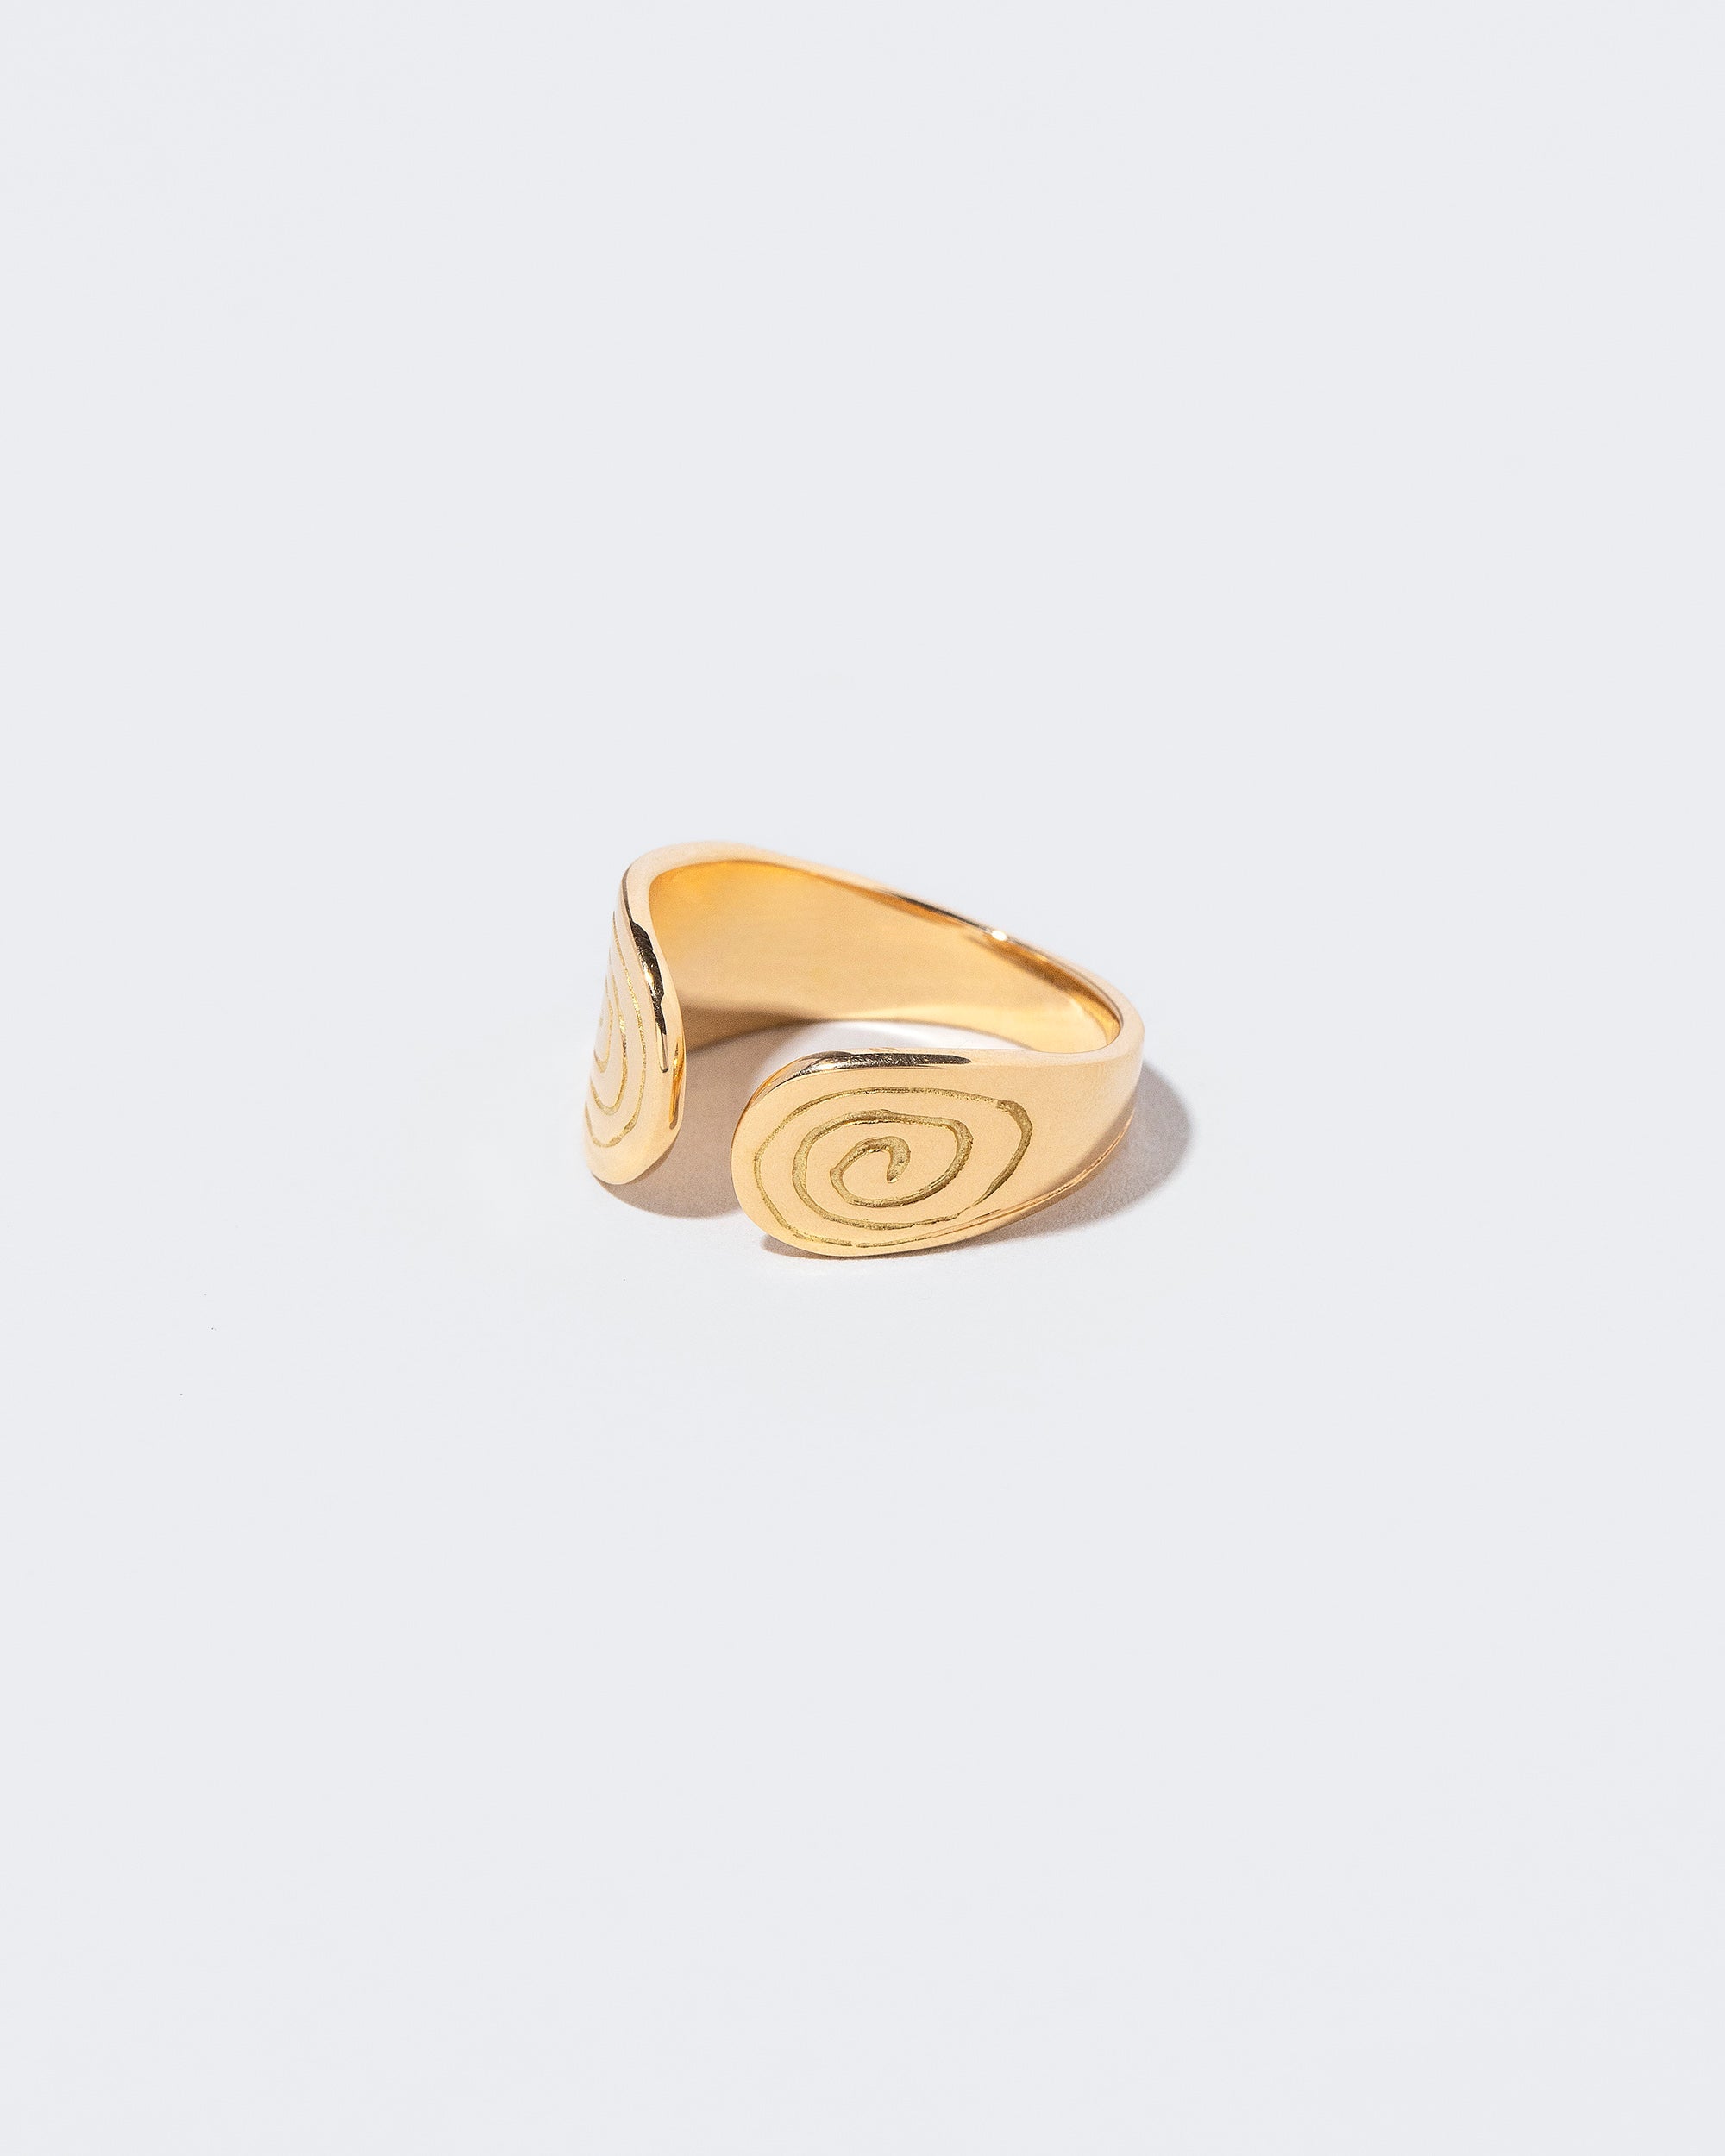 Metal of 24ct gold ring too soft - Jewelry Discussion - Ganoksin